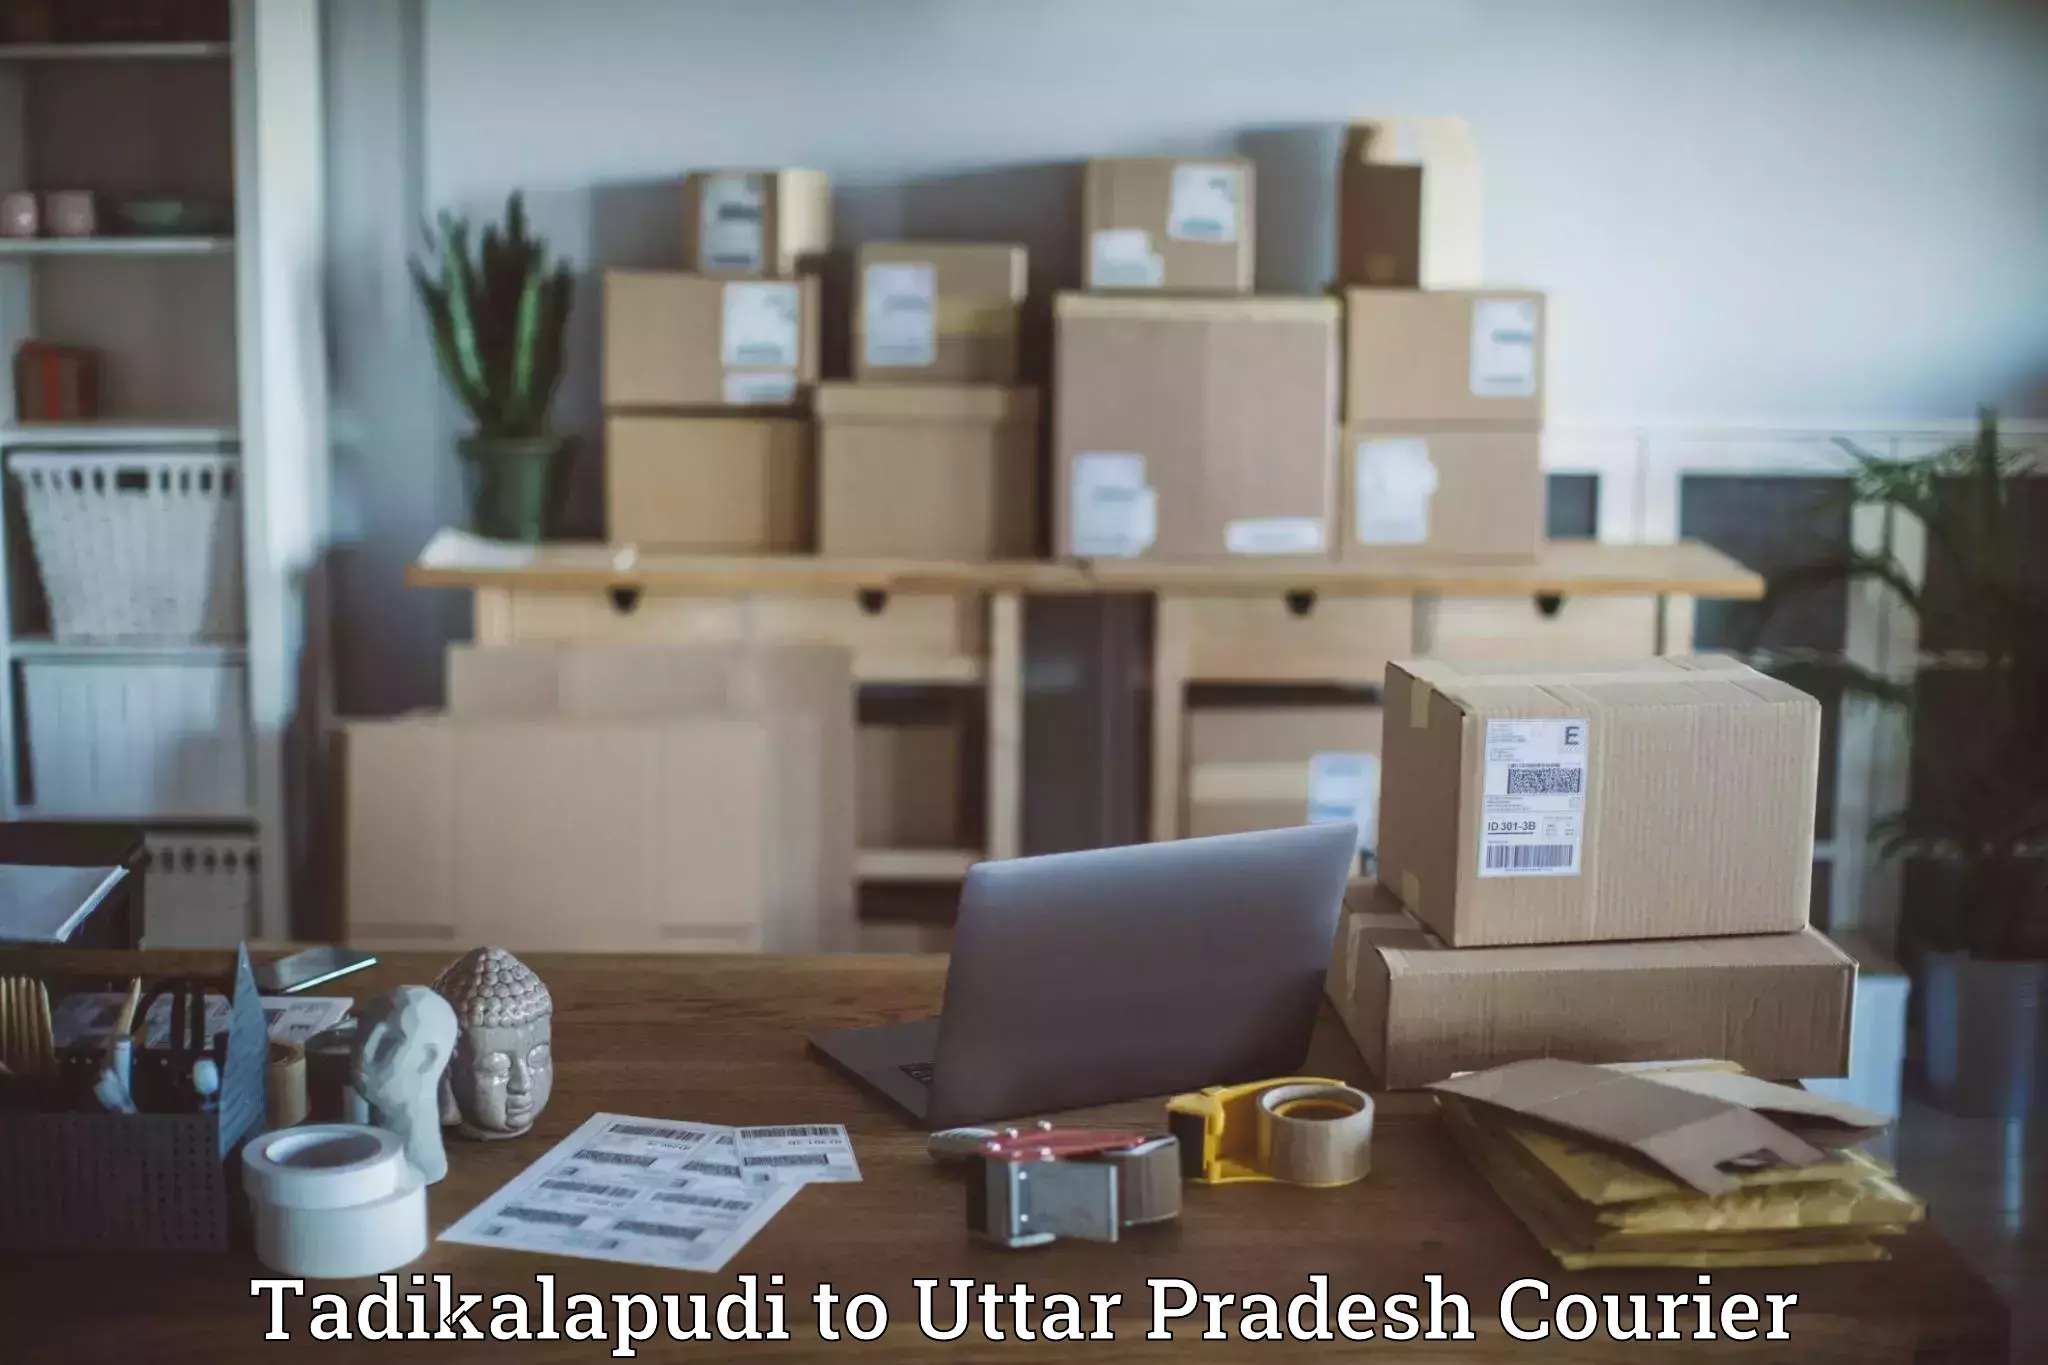 Innovative courier solutions Tadikalapudi to Rath